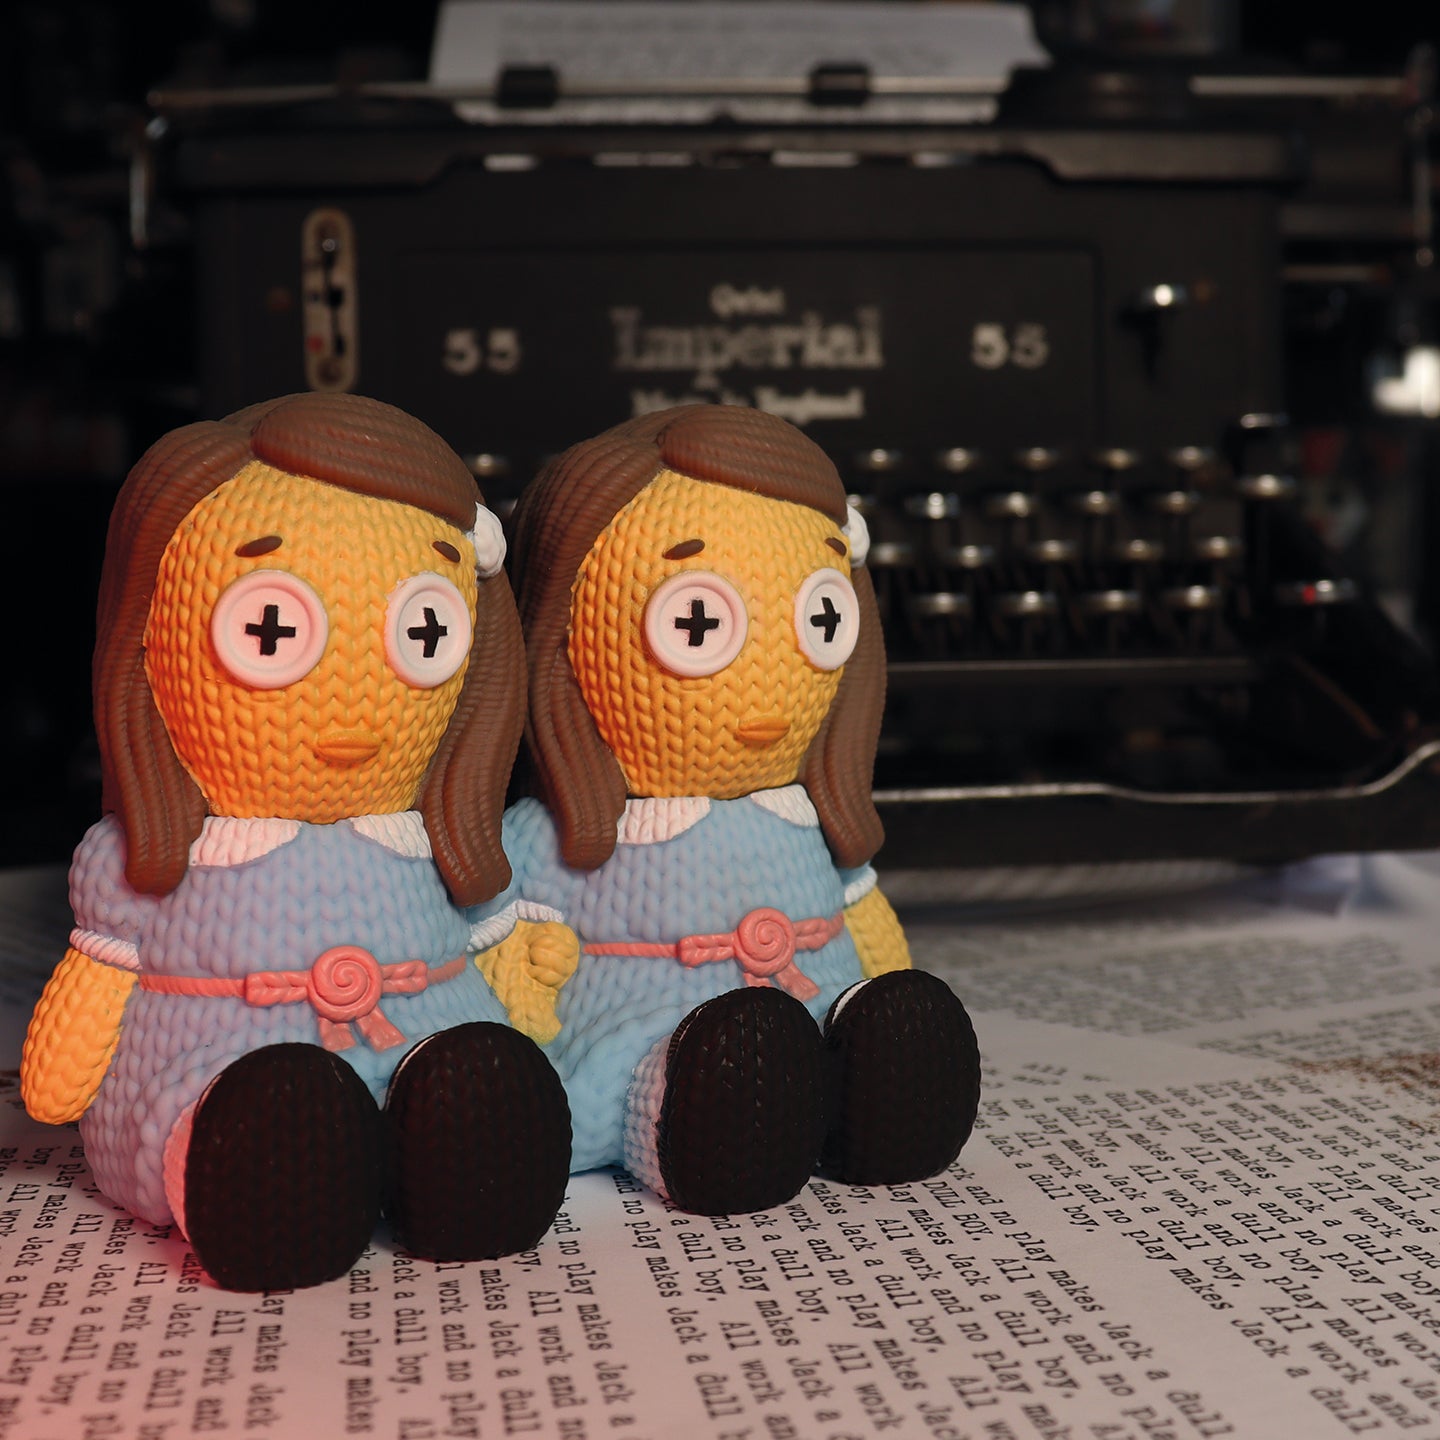 The Shining - The Grady Twins Collectible Vinyl Figure from Handmade By Robots